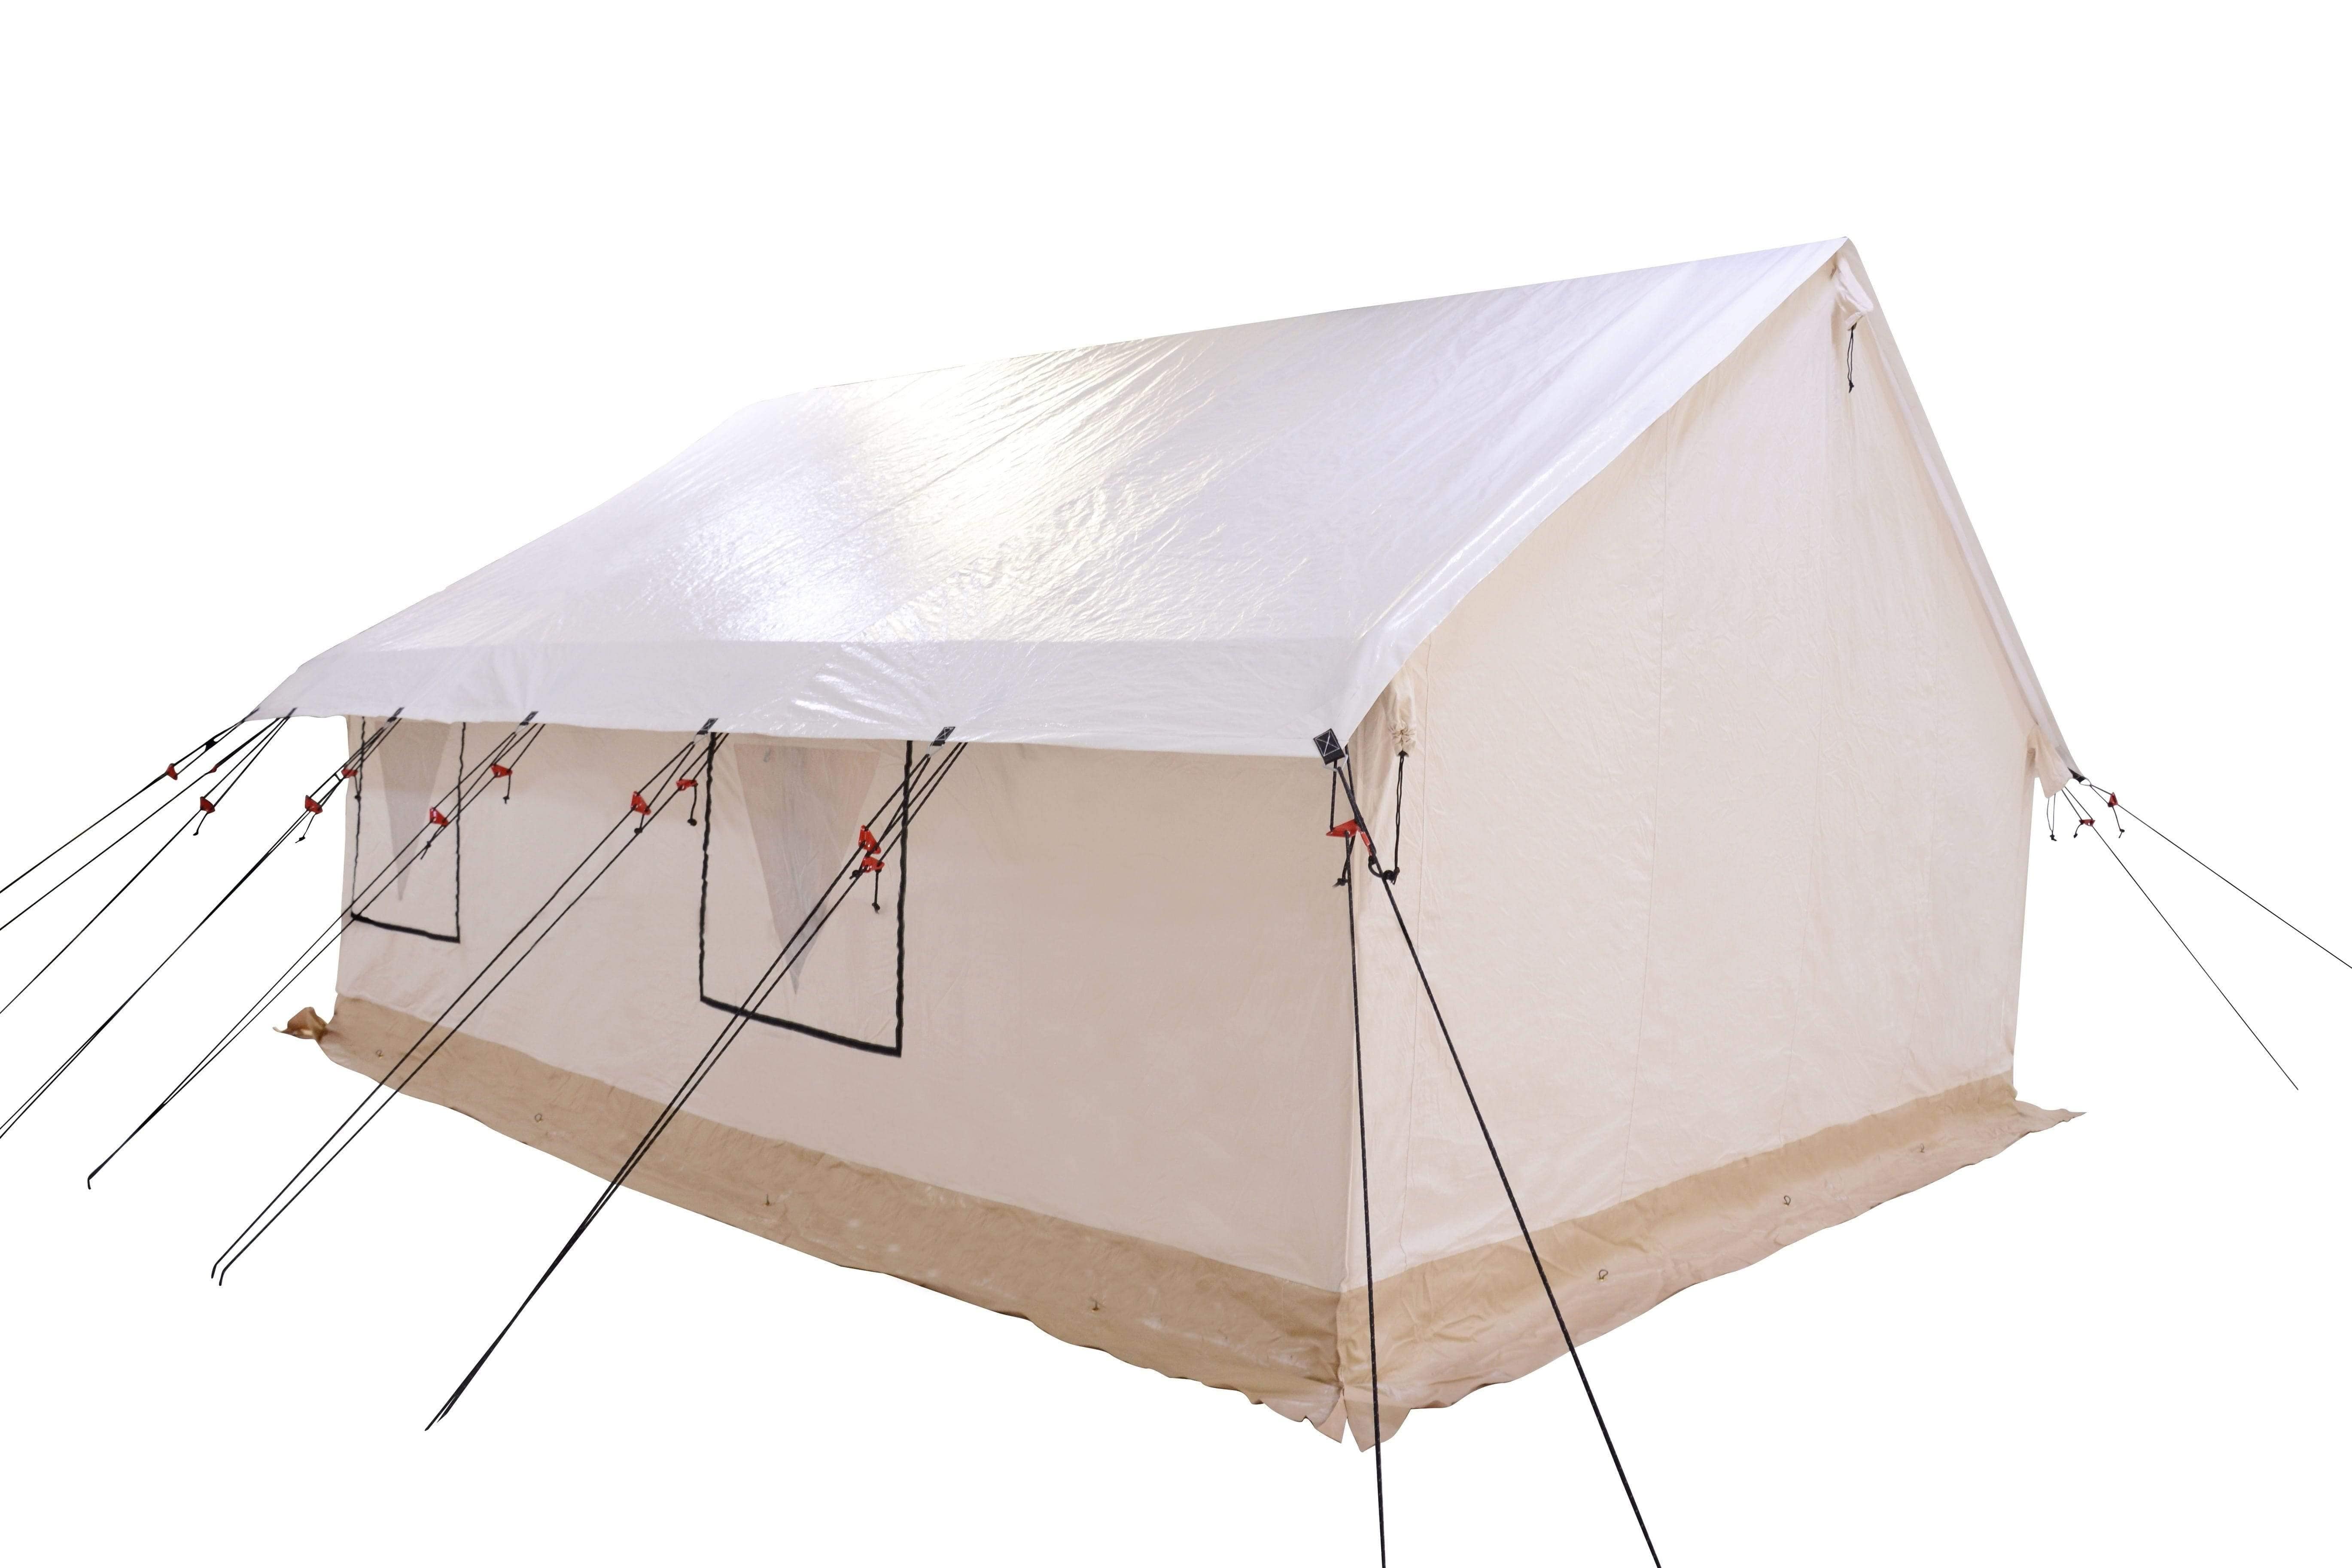 10’x12’ Fly Sheet - Canvas Wall Tent